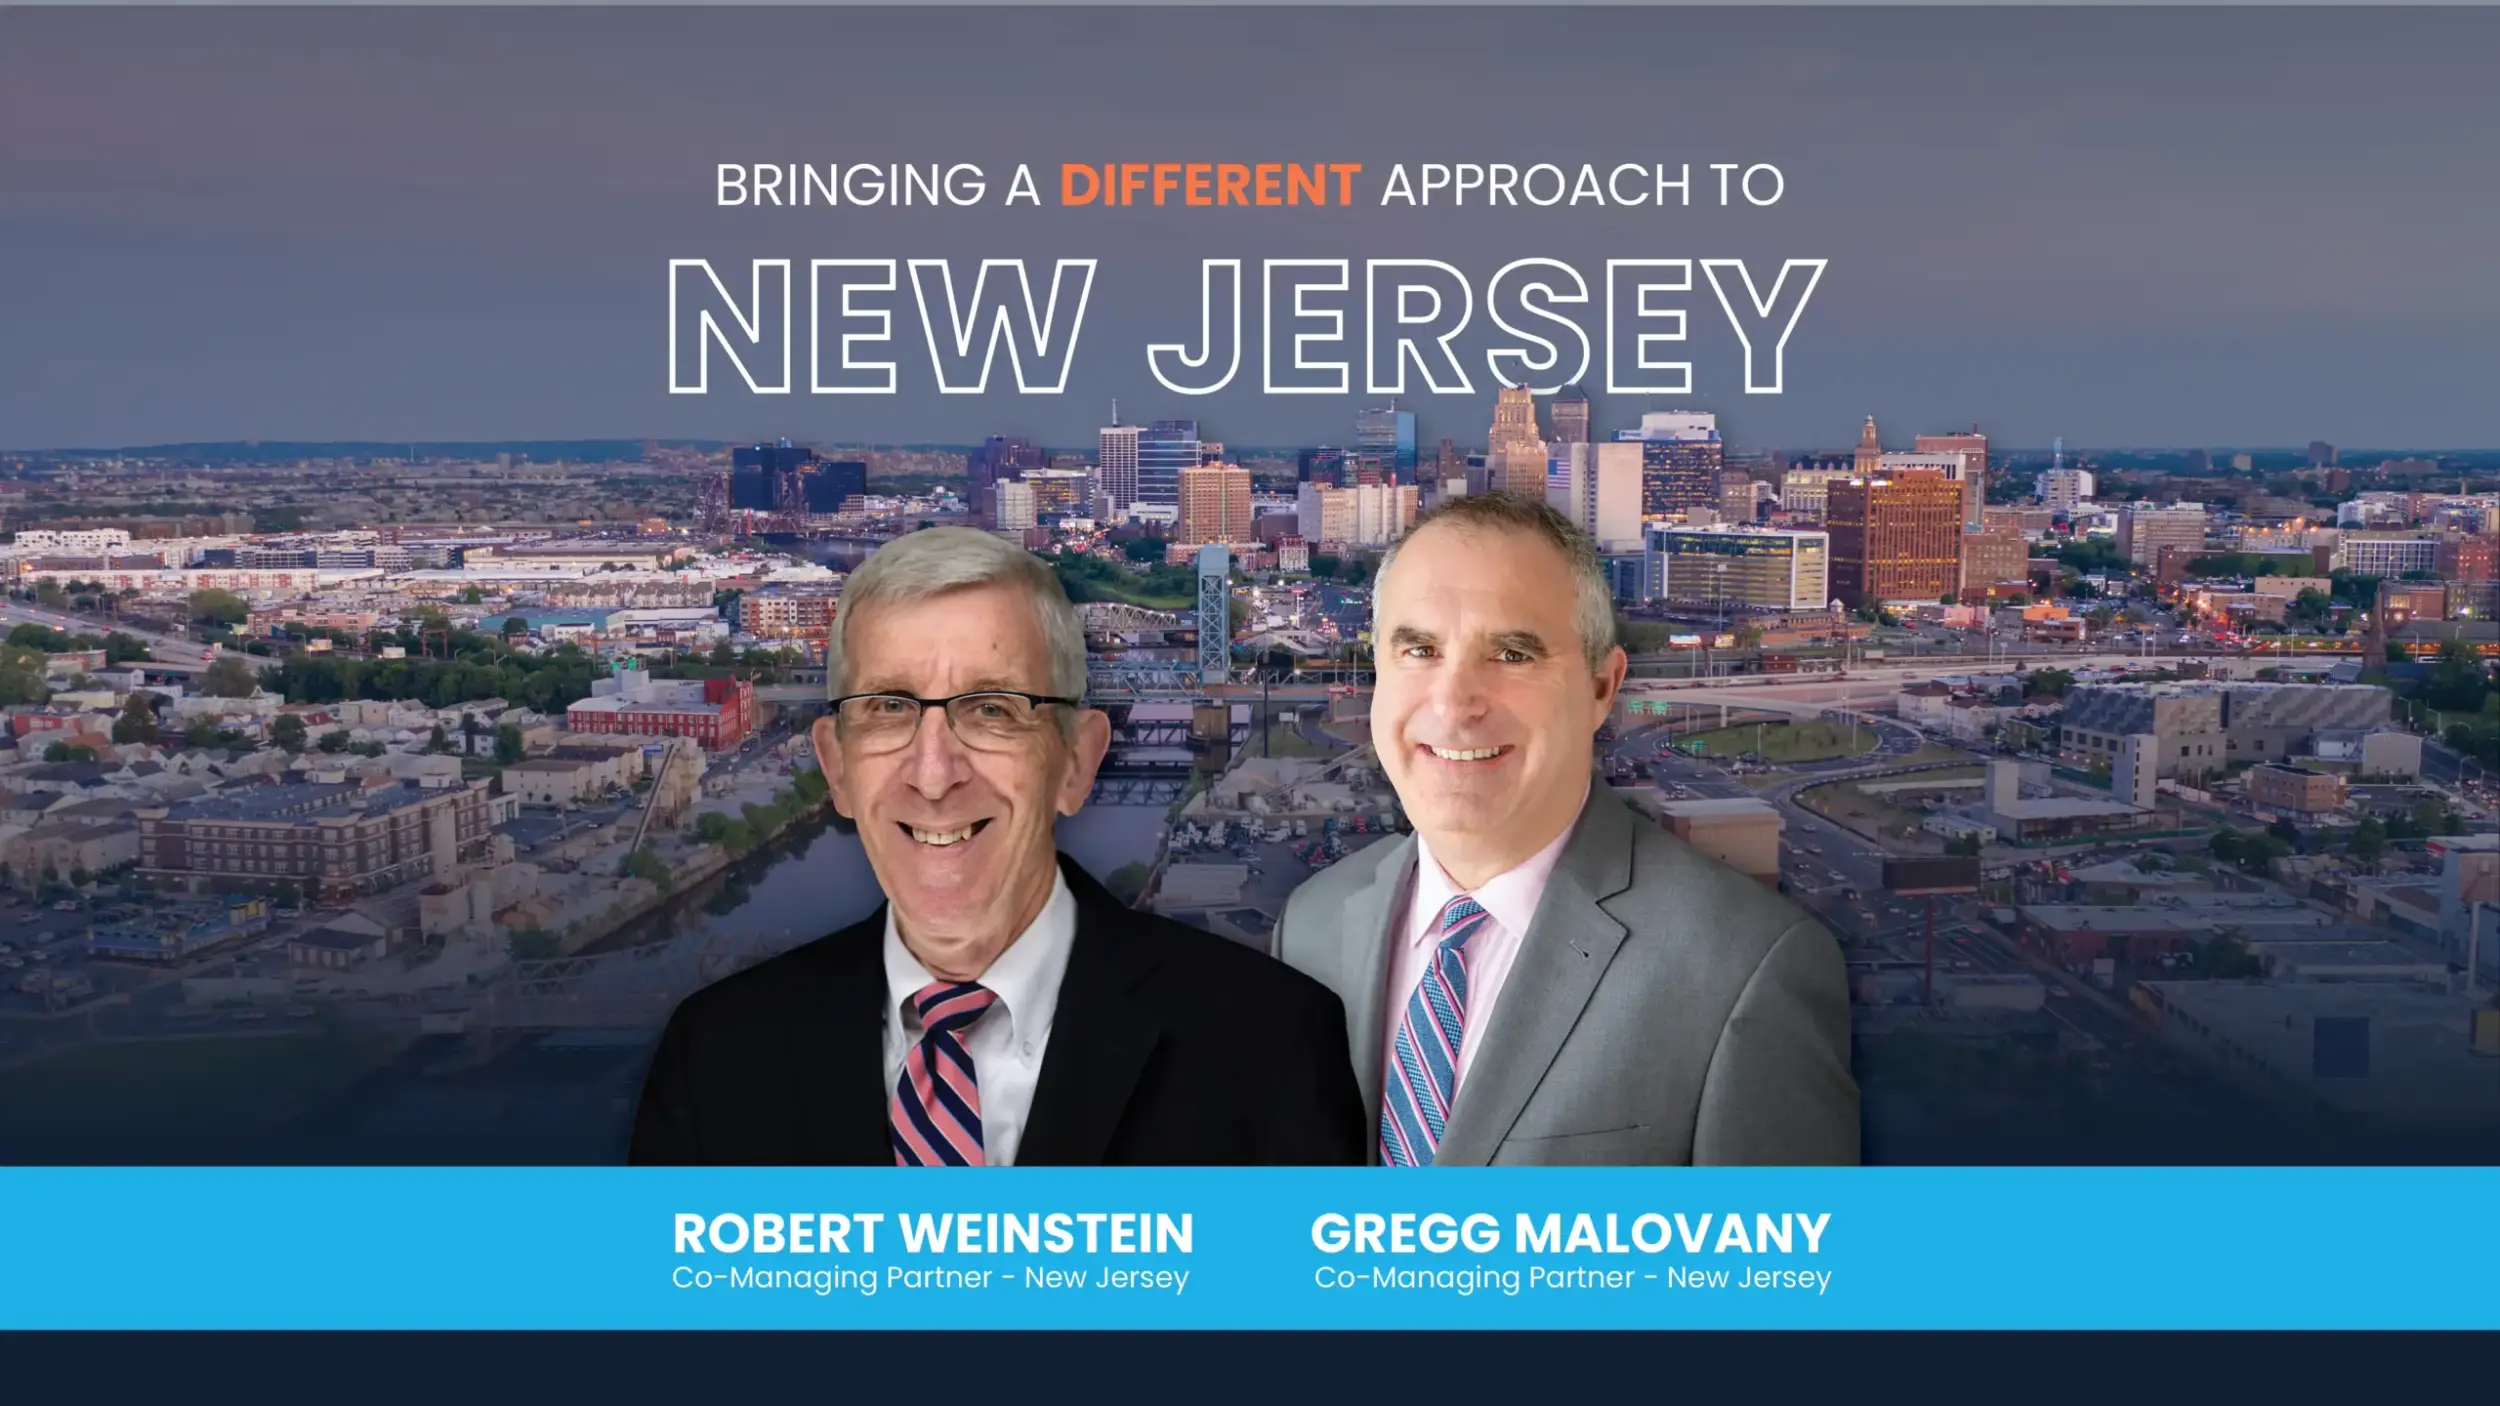 The Workers’ Comp Practice at QPWB Continues National Growth with Addition of New Jersey Hub